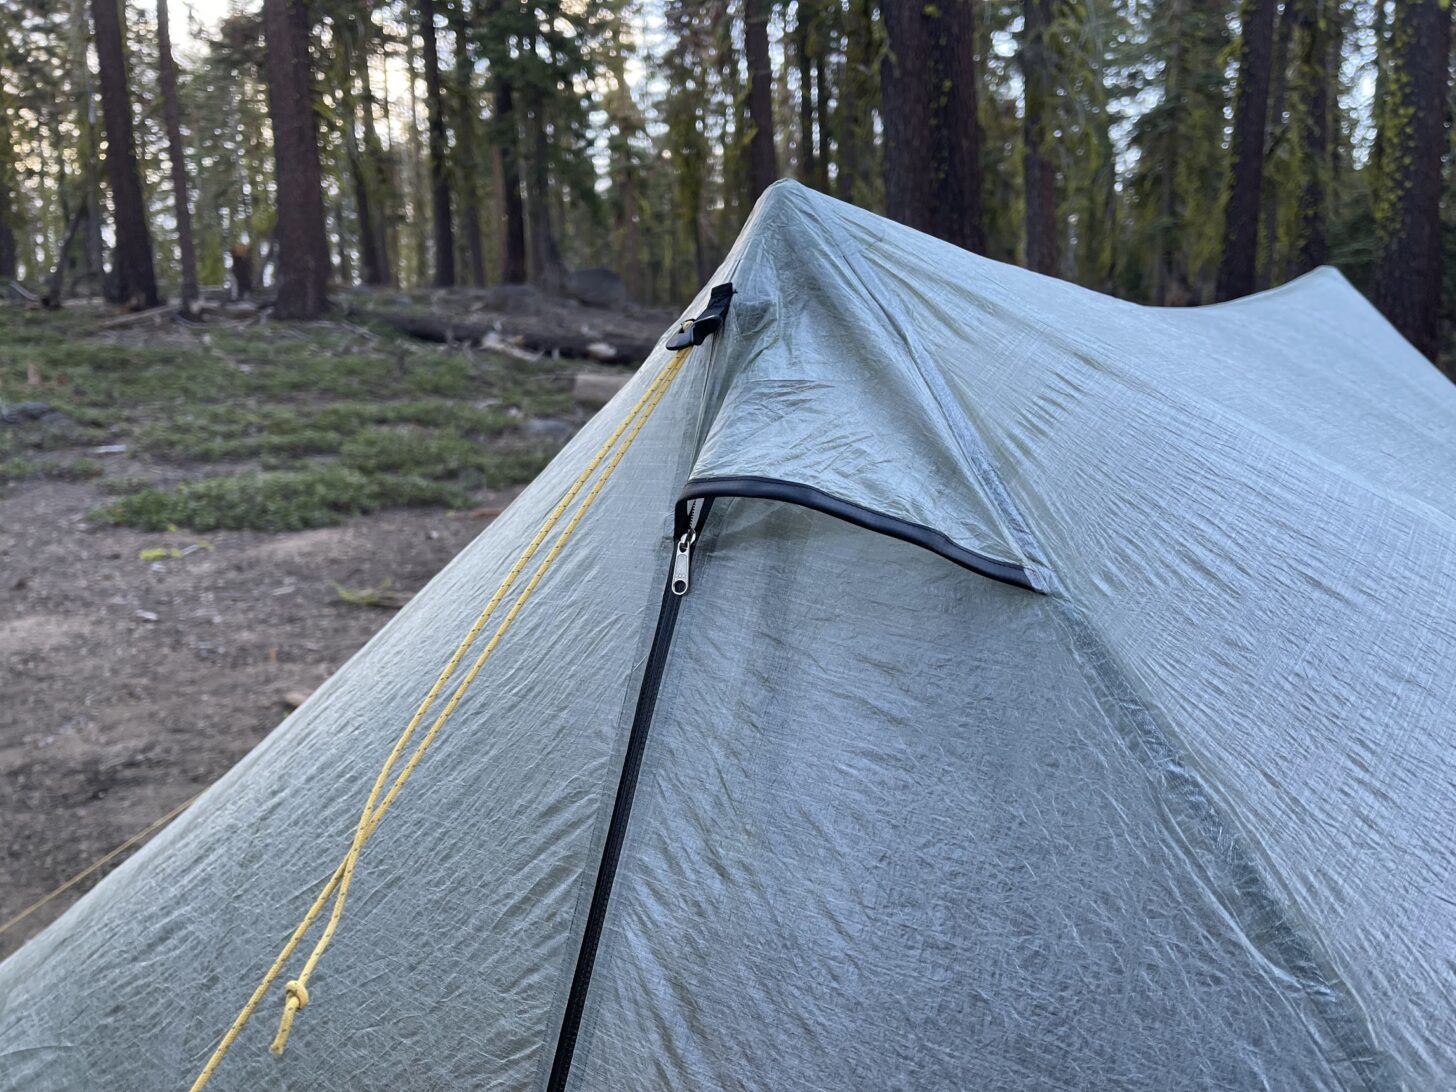 a close-up of the vent and ridgeline on the Tarptent dipole 2